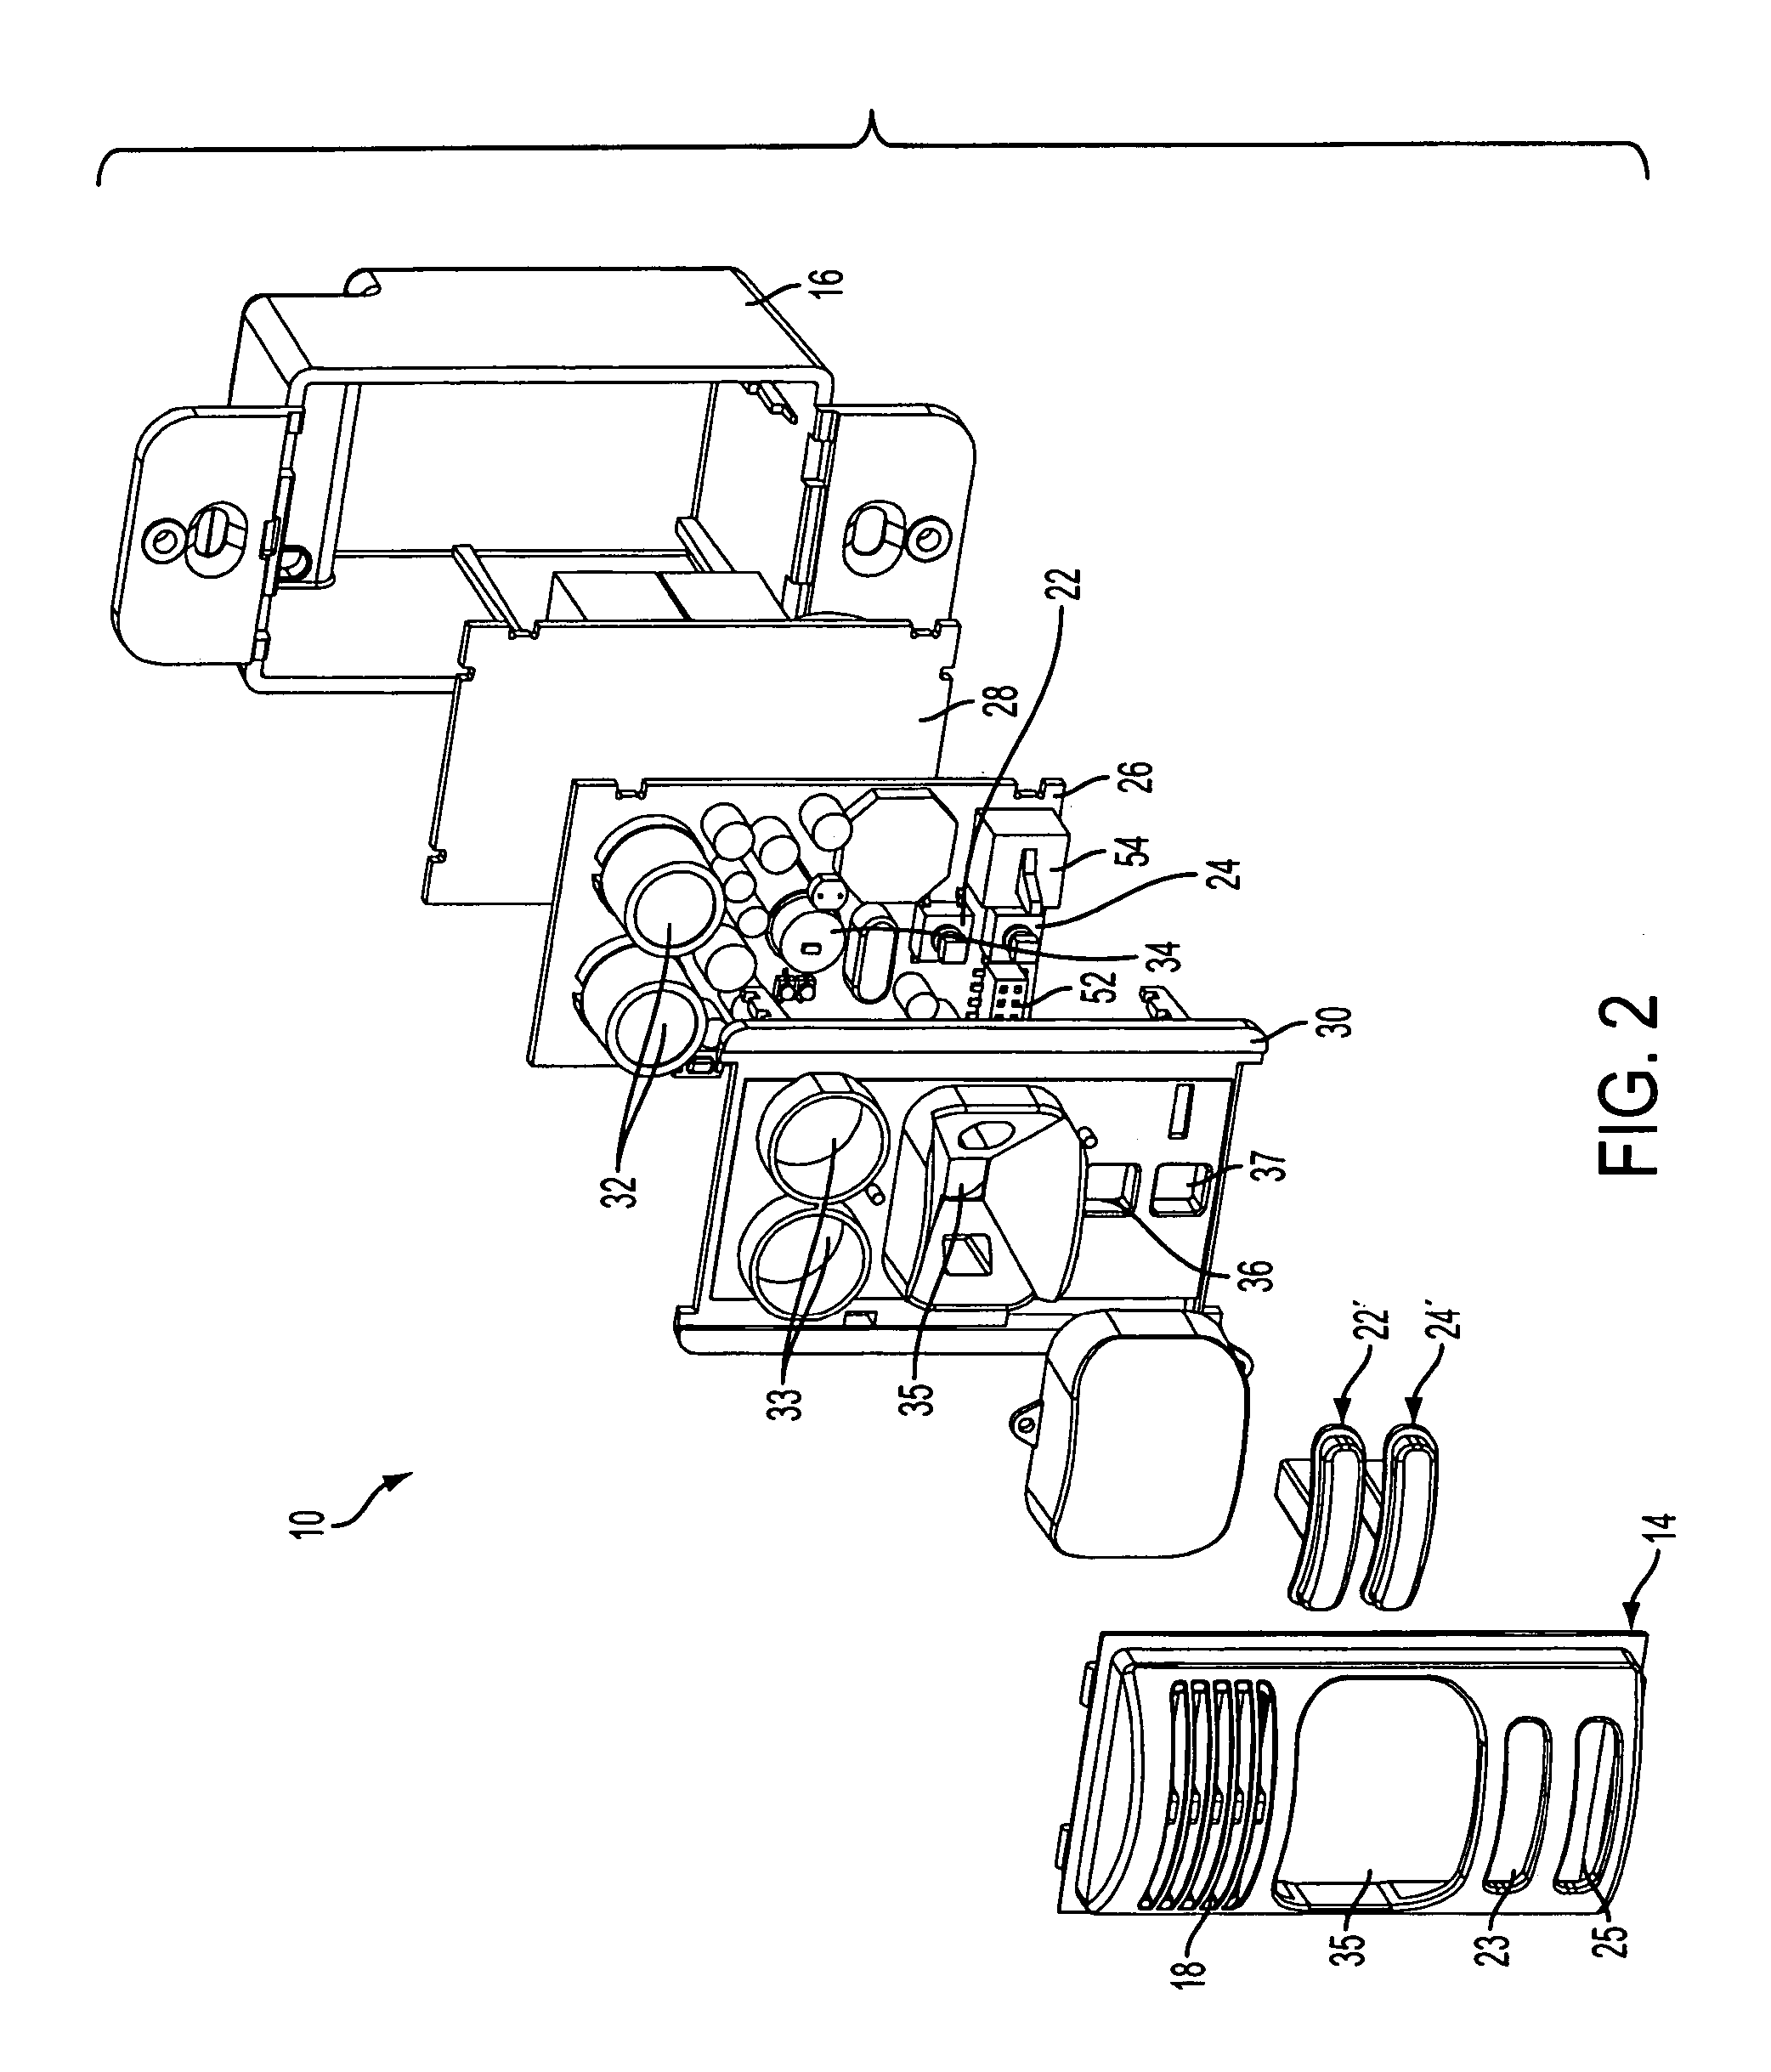 Dual circuit wall switch occupancy sensor and method of operating same